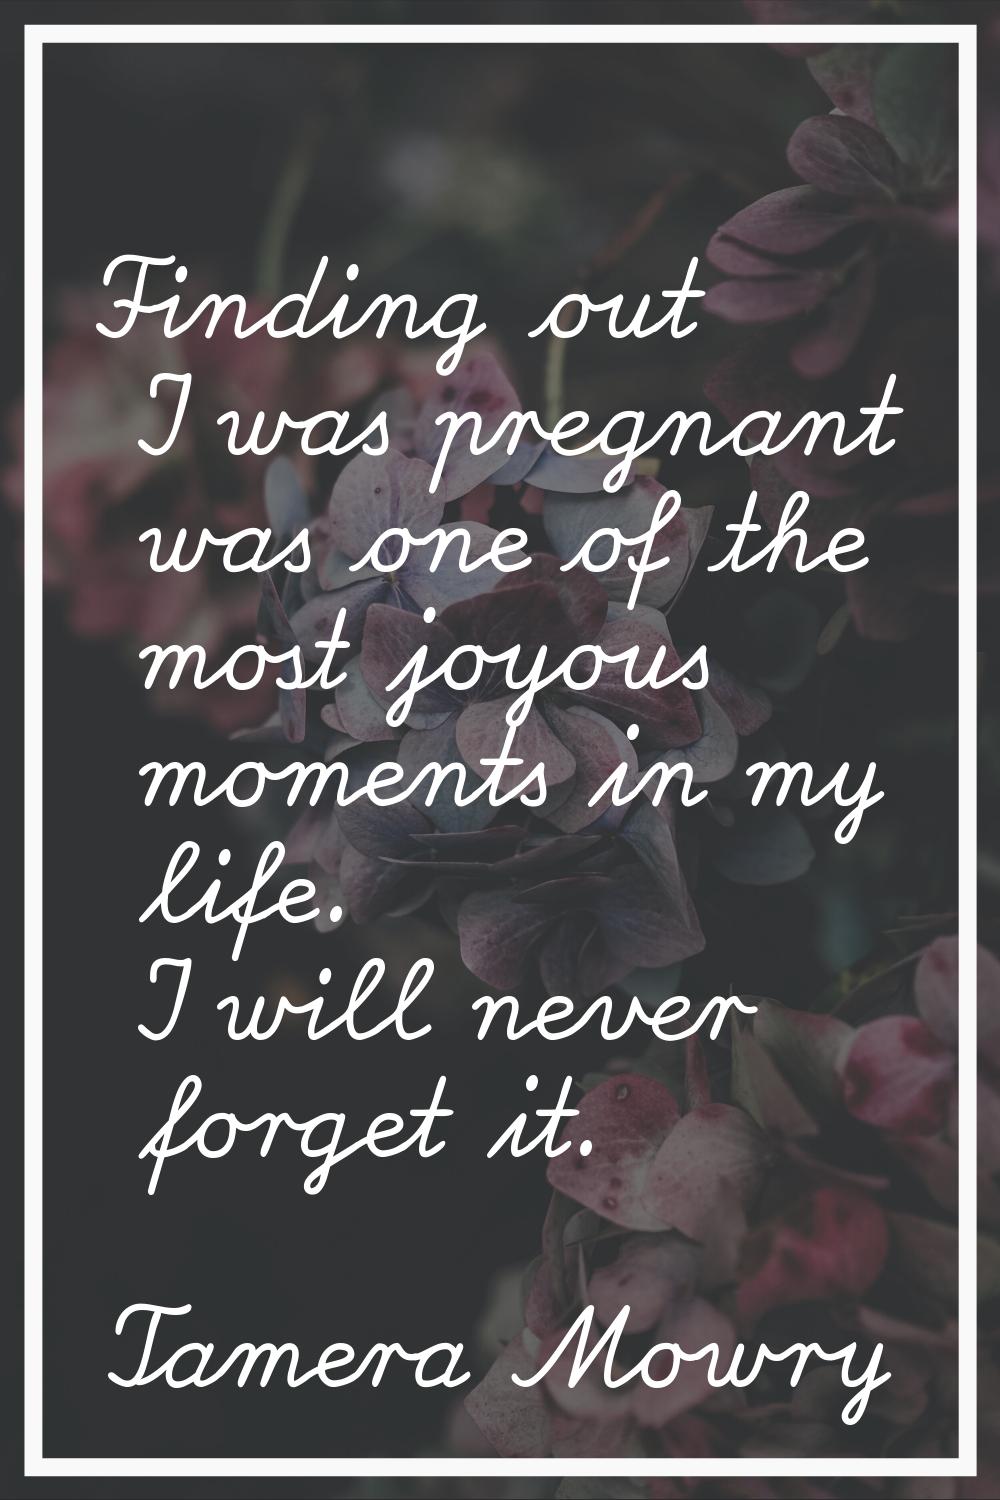 Finding out I was pregnant was one of the most joyous moments in my life. I will never forget it.